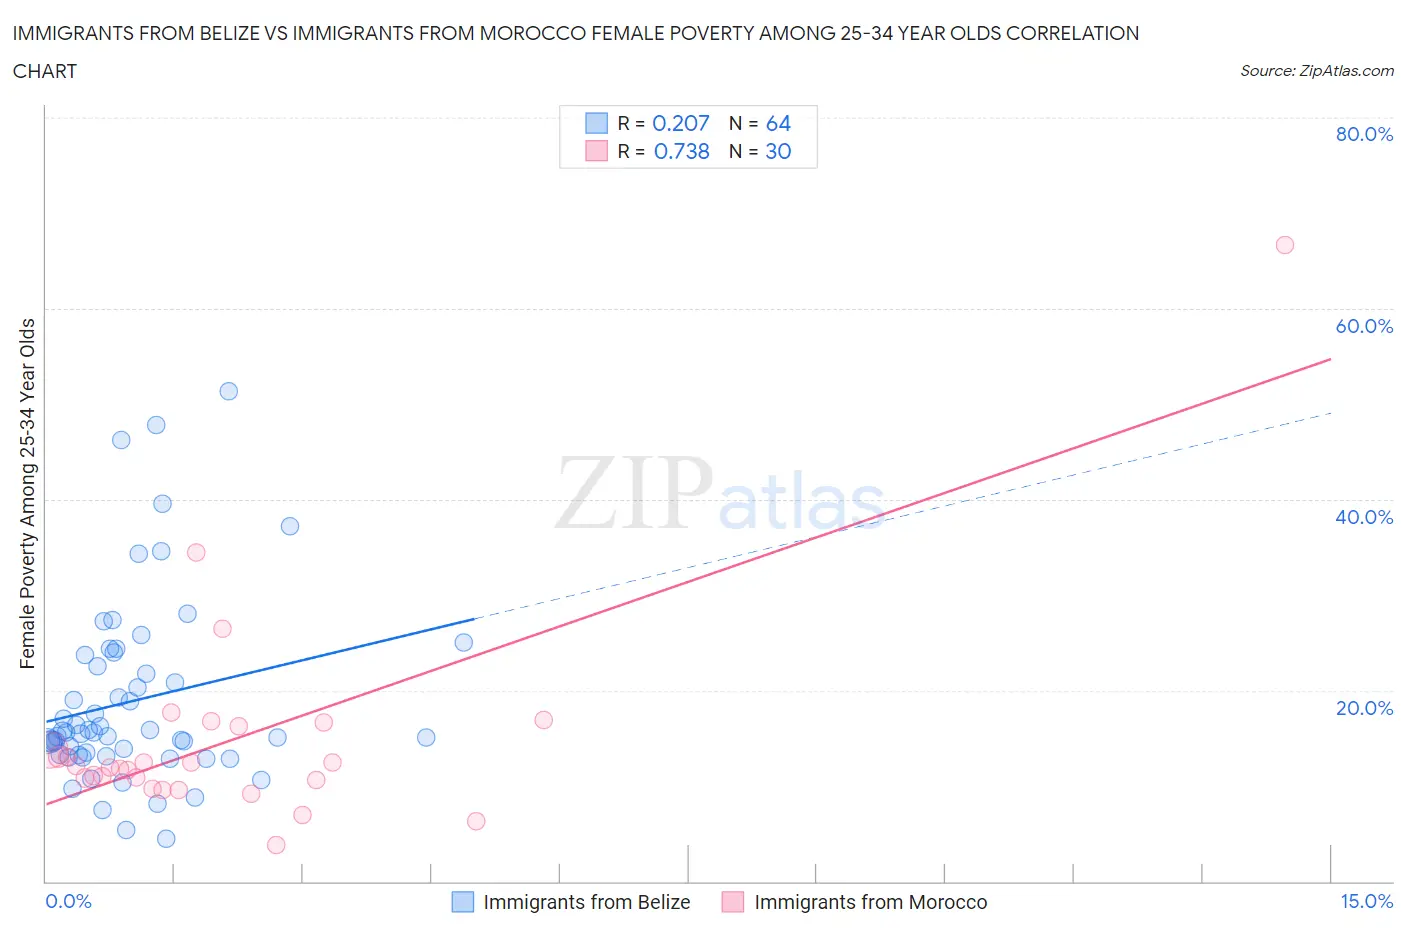 Immigrants from Belize vs Immigrants from Morocco Female Poverty Among 25-34 Year Olds